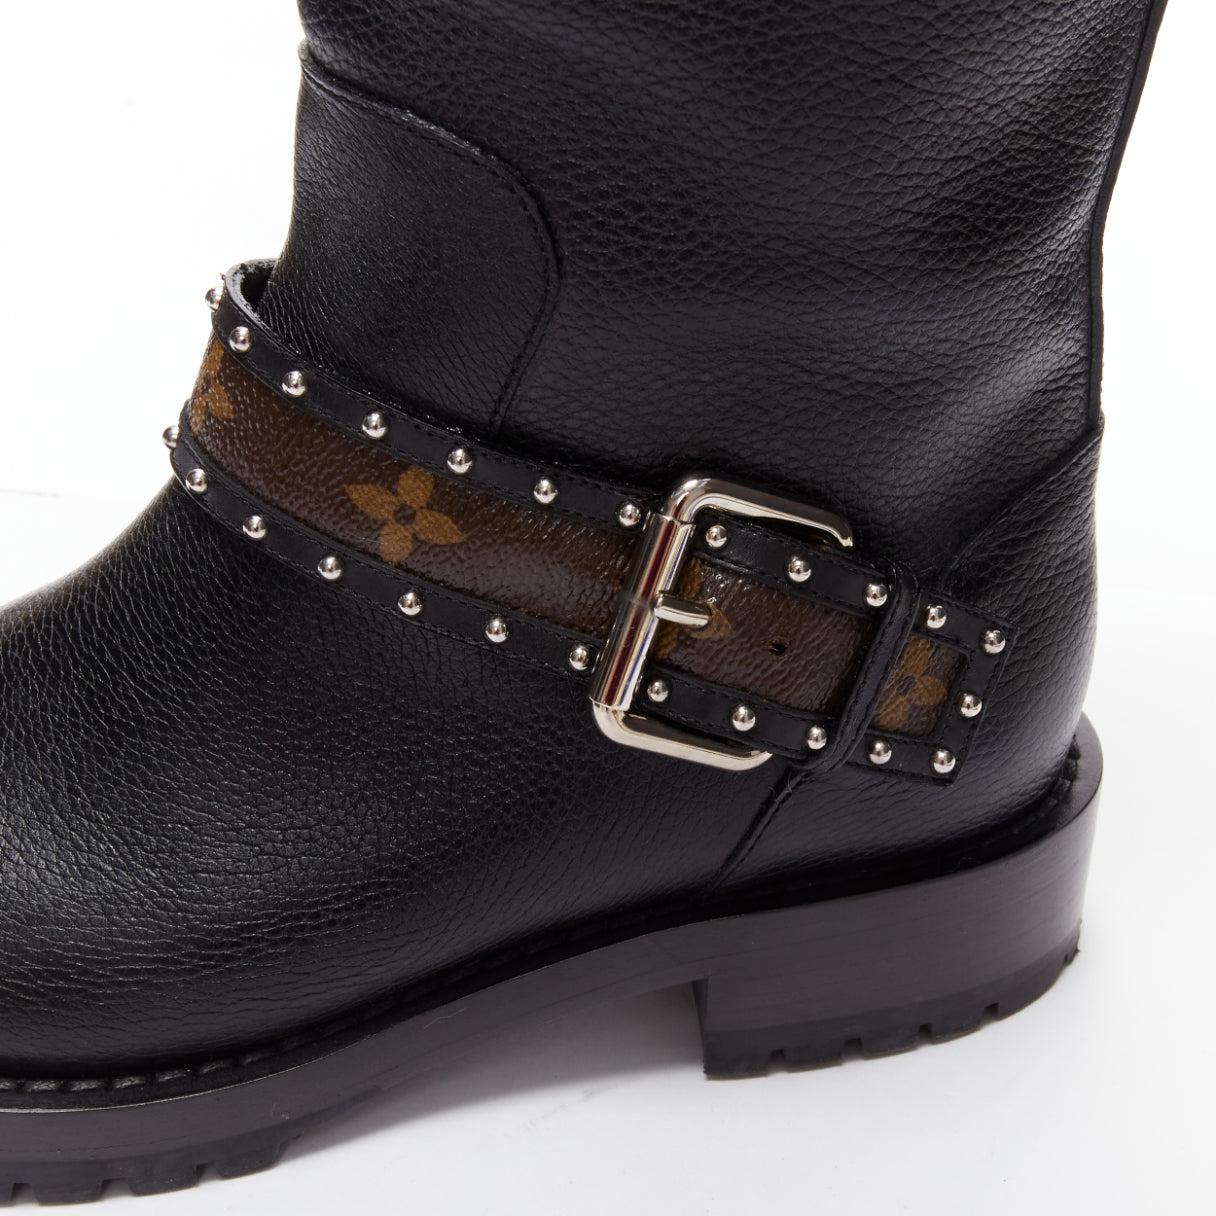 LOUIS VUITTON LV monogram top strap pull on motorcycle boots EU37 For Sale 2